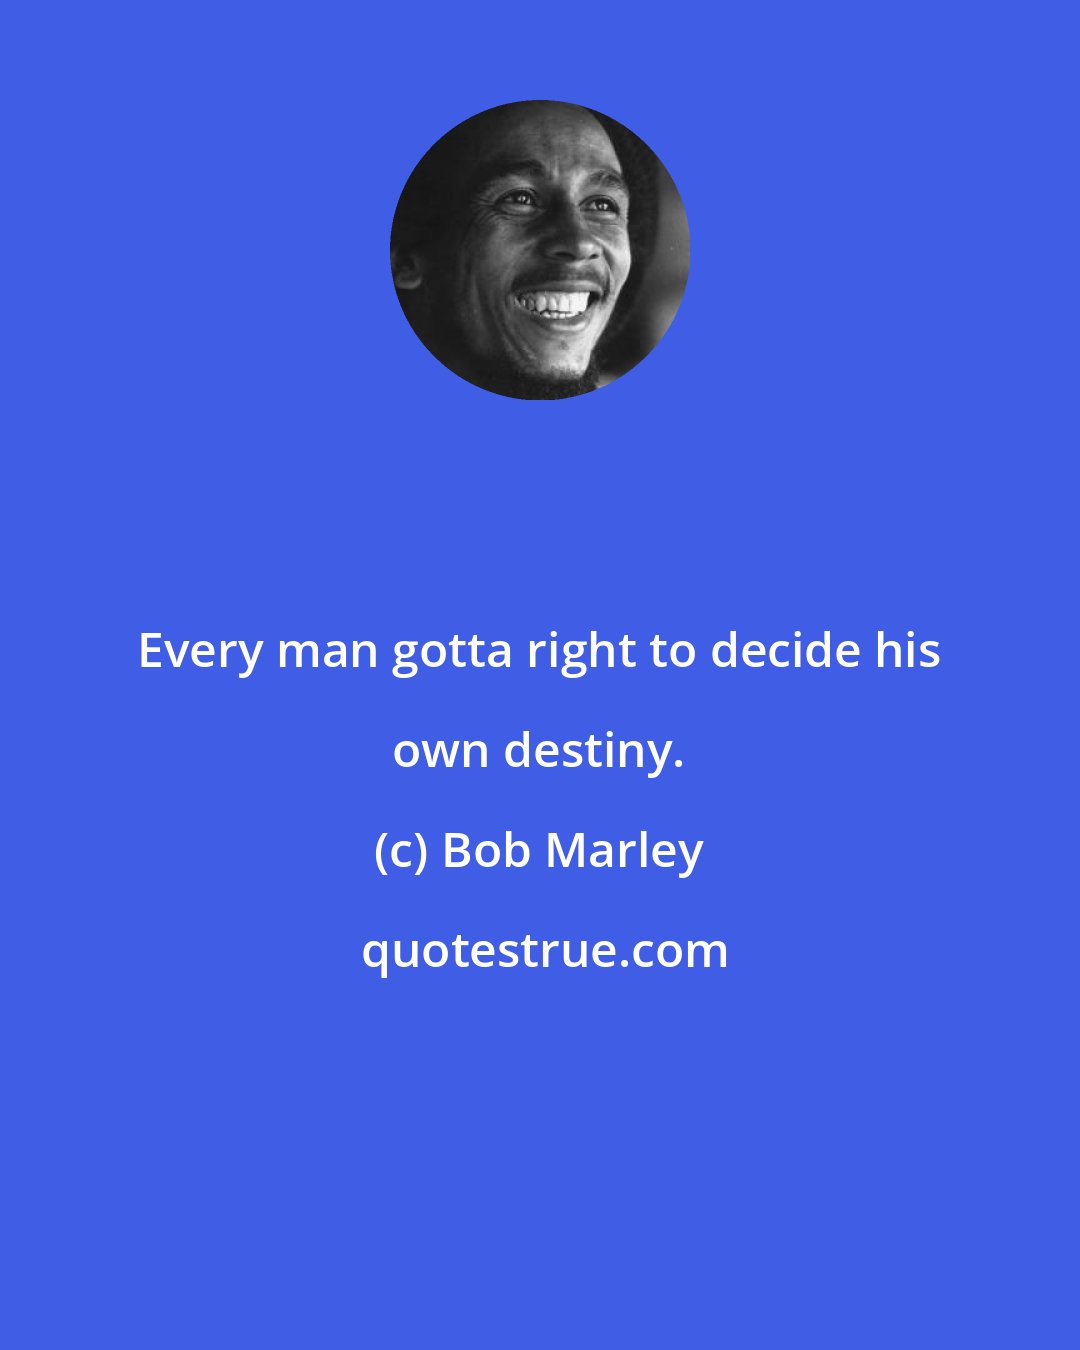 Bob Marley: Every man gotta right to decide his own destiny.